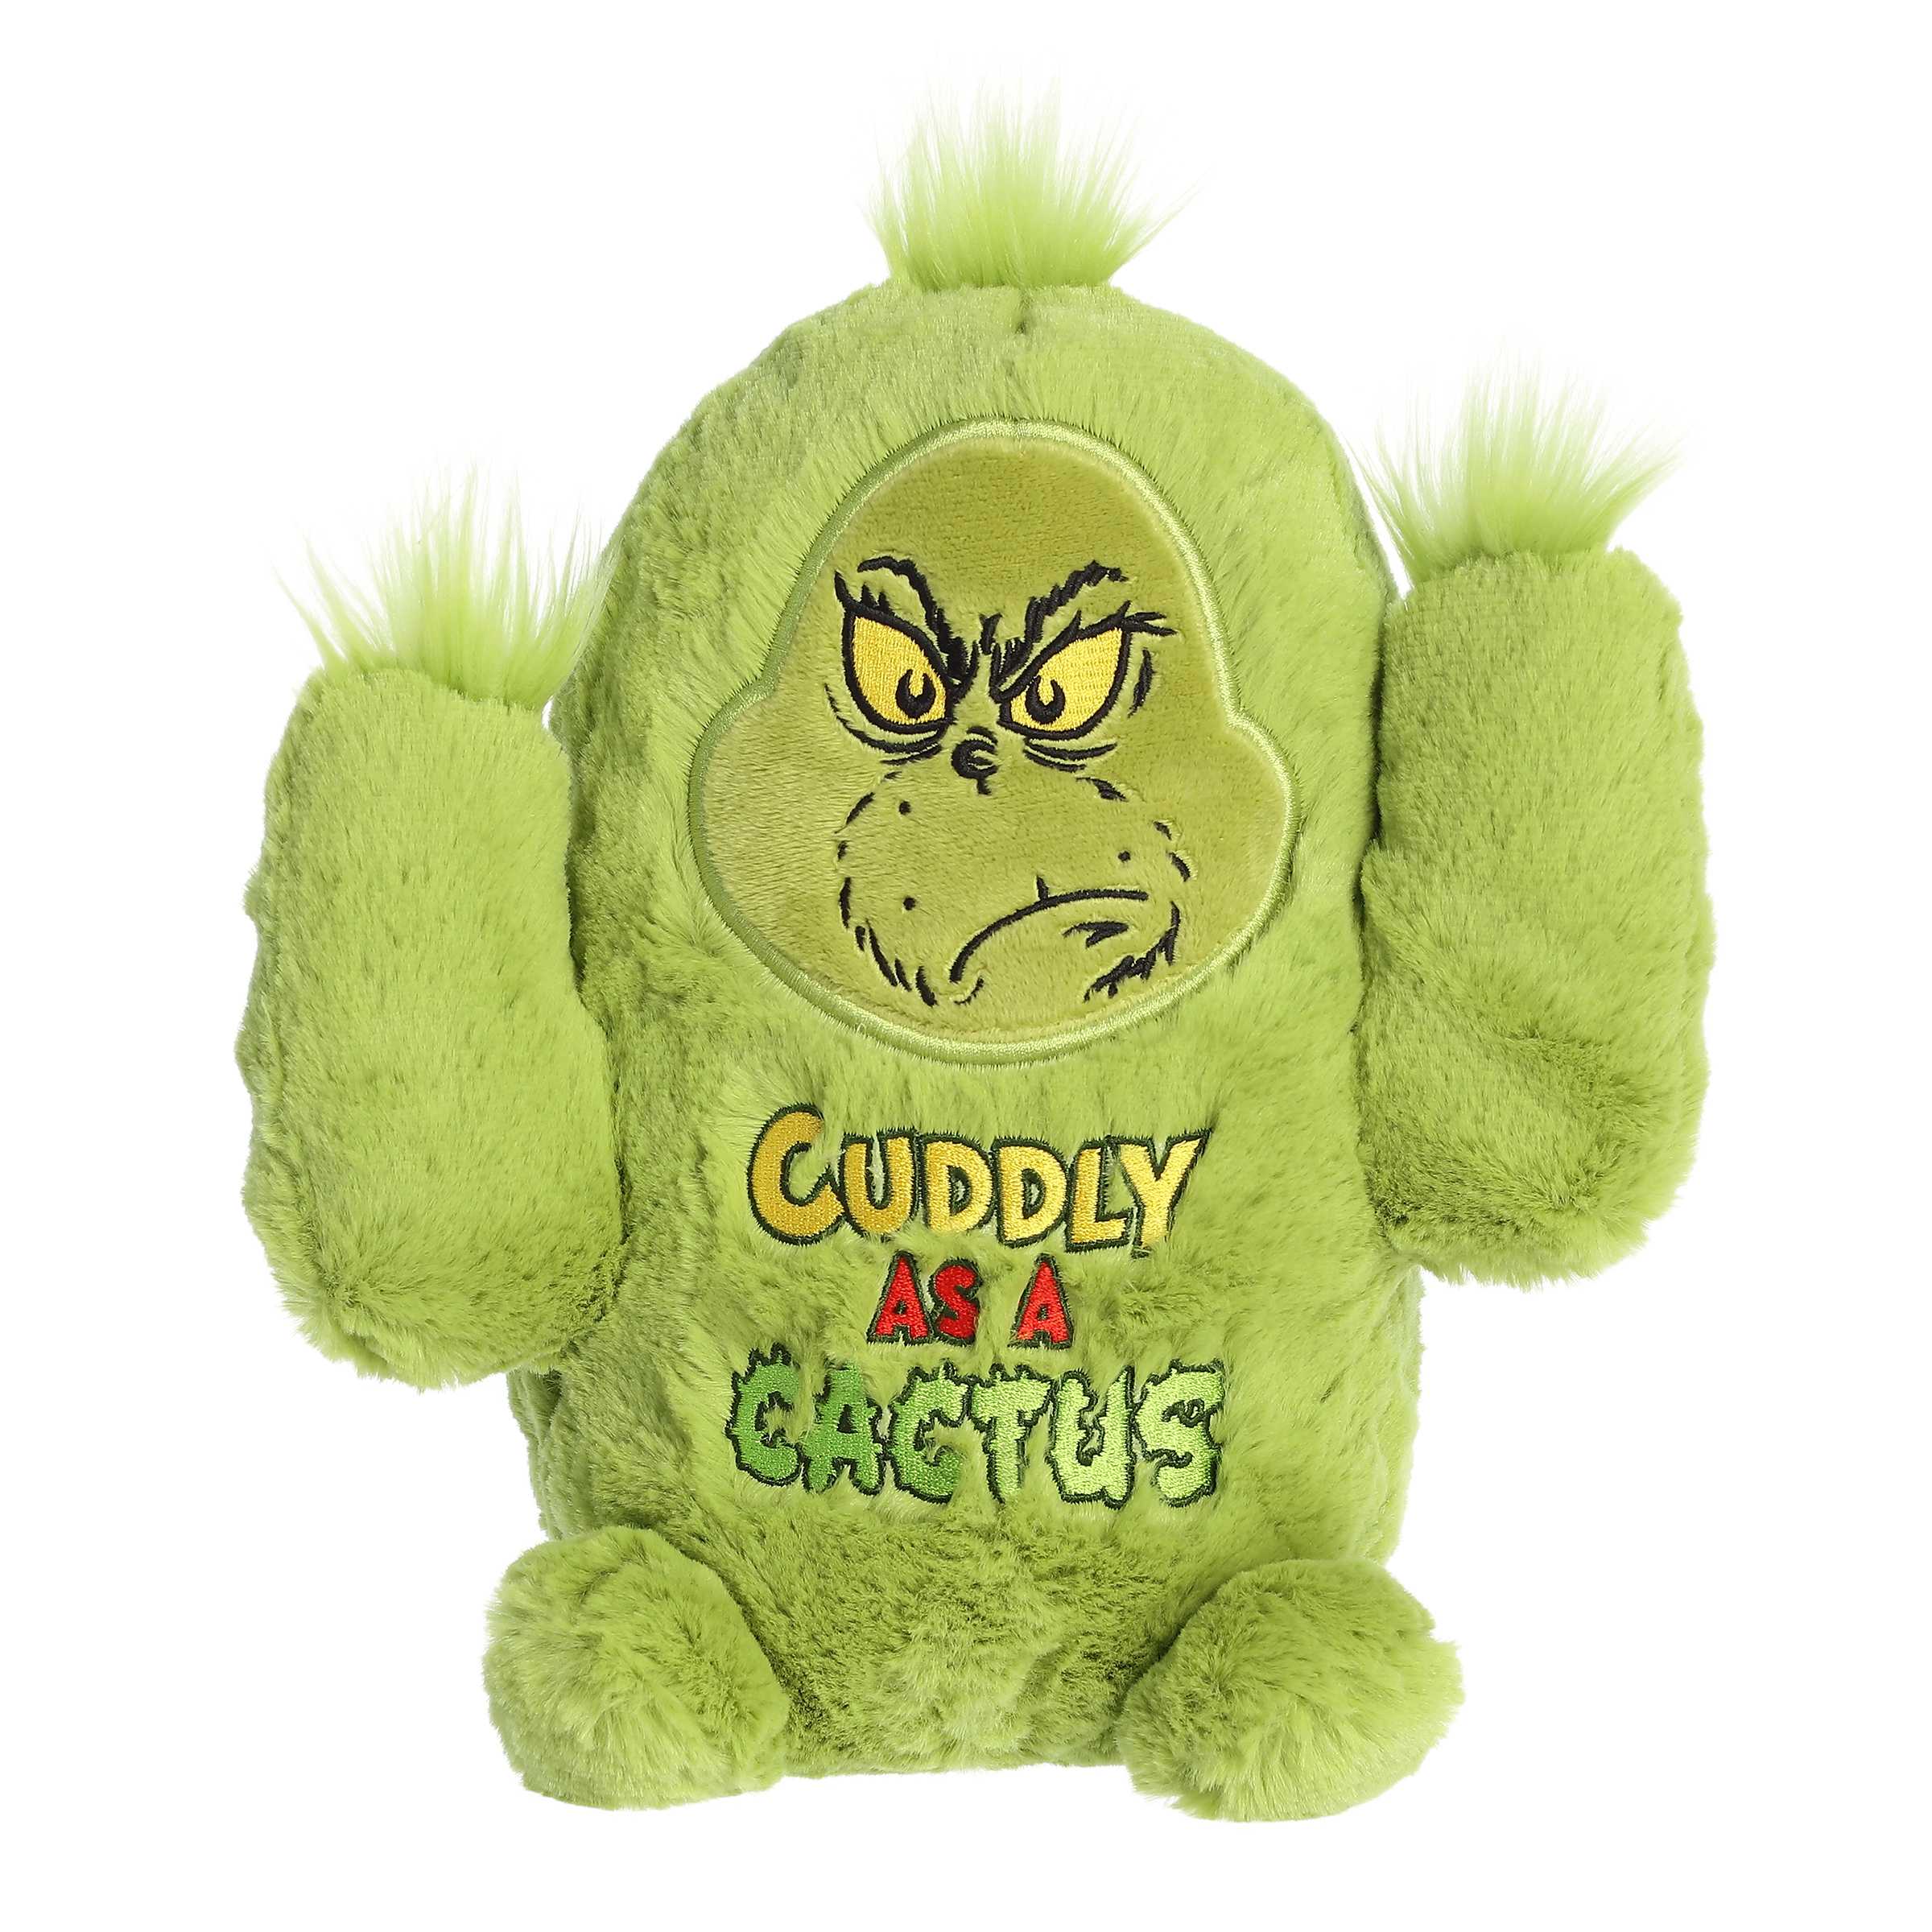 Soft, huggable Grinch Plush with iconic scowl, resembling a cactus with "cuddly as a cactus" embroidered.